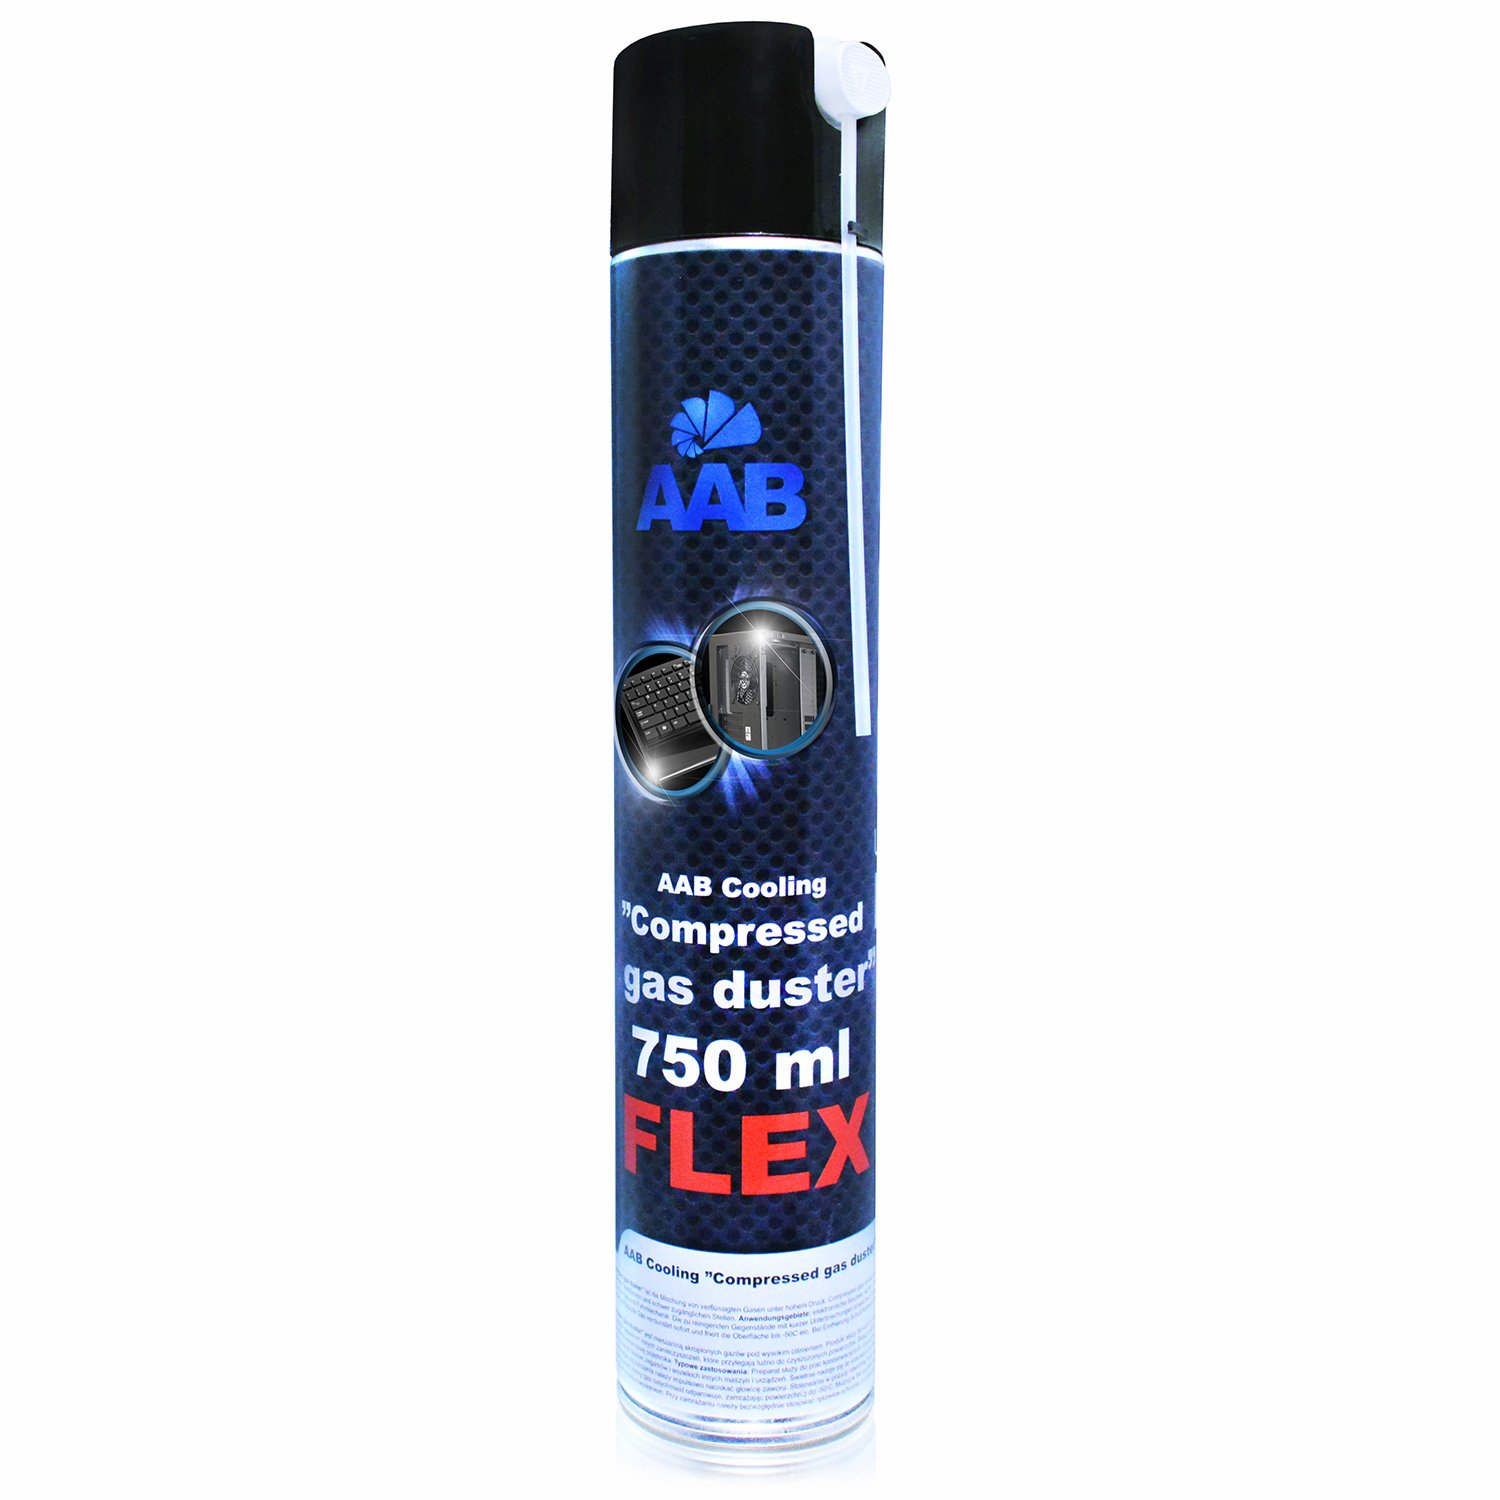 aabcooling_compressed_gas_duster_flexl_dsc_1500x1500amaz1